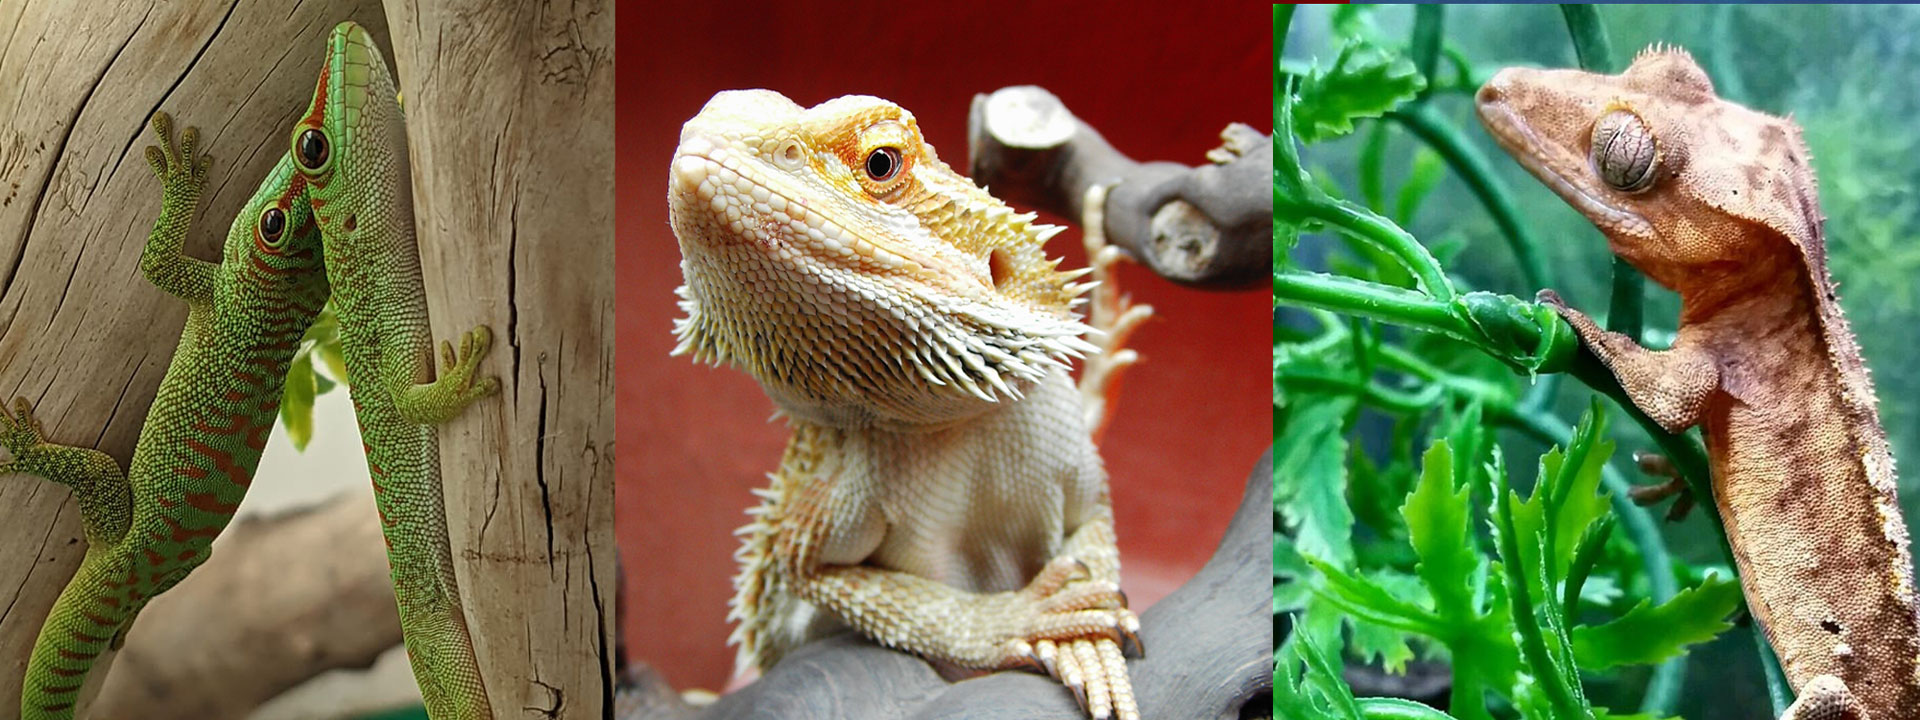 Lizards For Sale - Beardies, Geckos and more